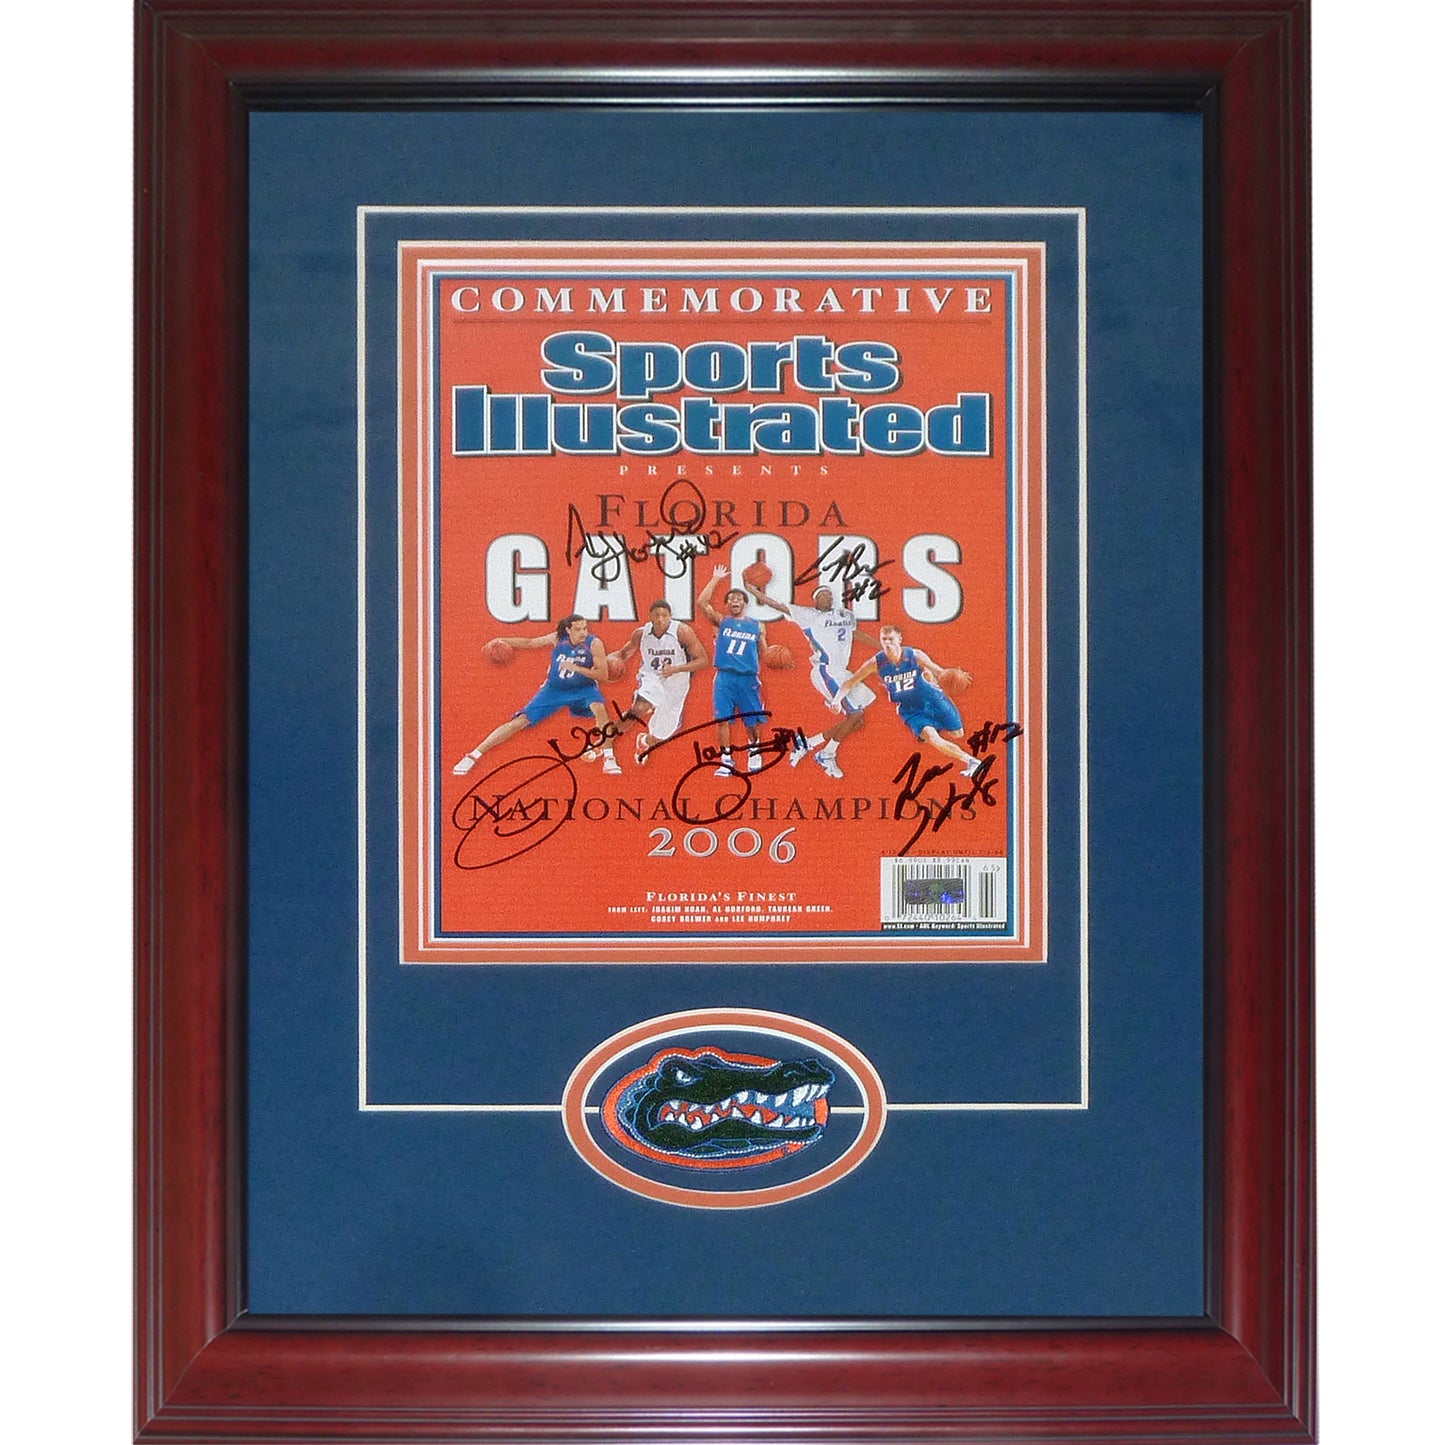 Florida Gators "Starting 5" Autographed (2006 Championship) Deluxe Framed Commemorative Sports Illustrated